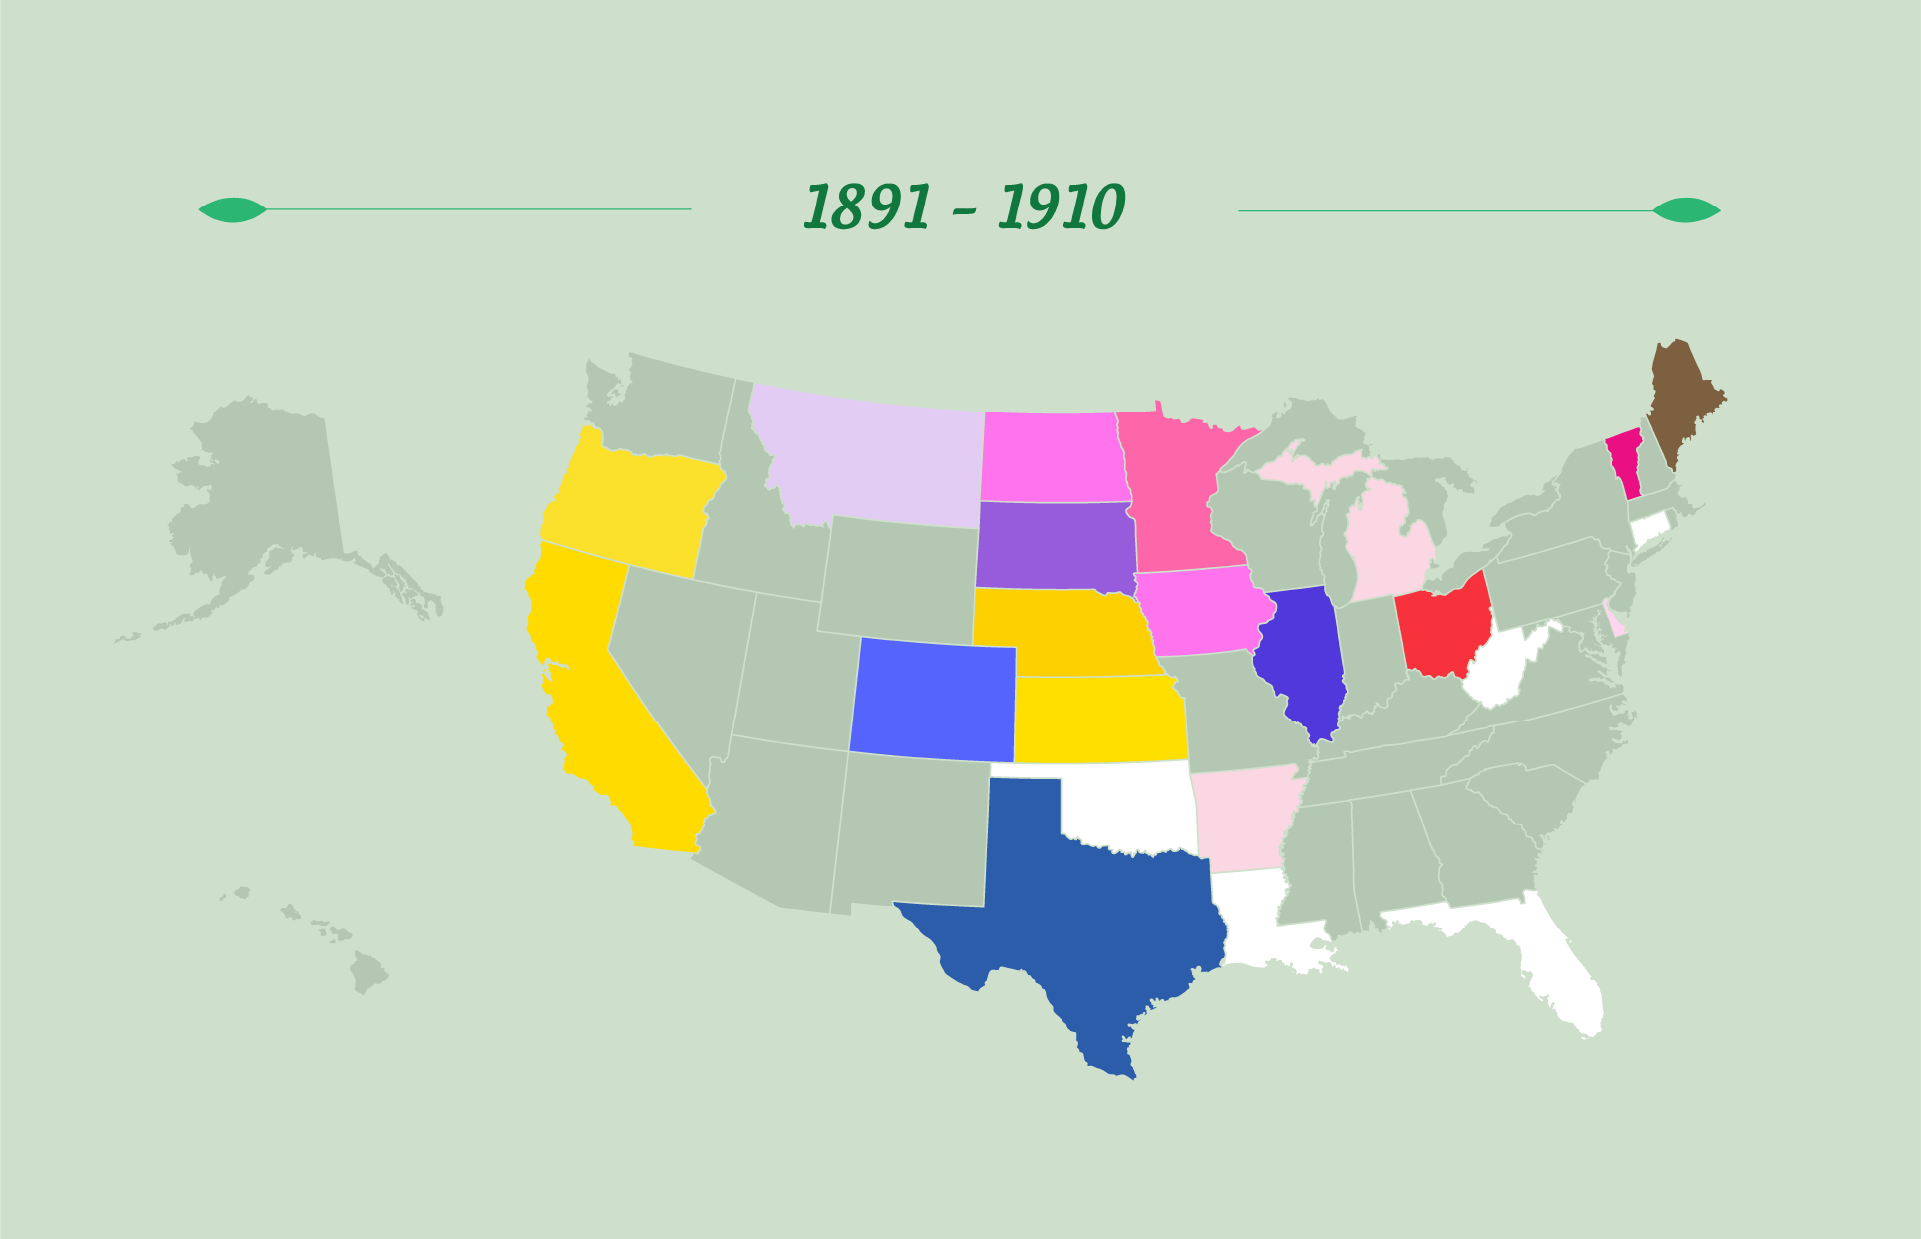 50 U.S. State Flowers infographic snippet showing 1891 to 1910 timeline